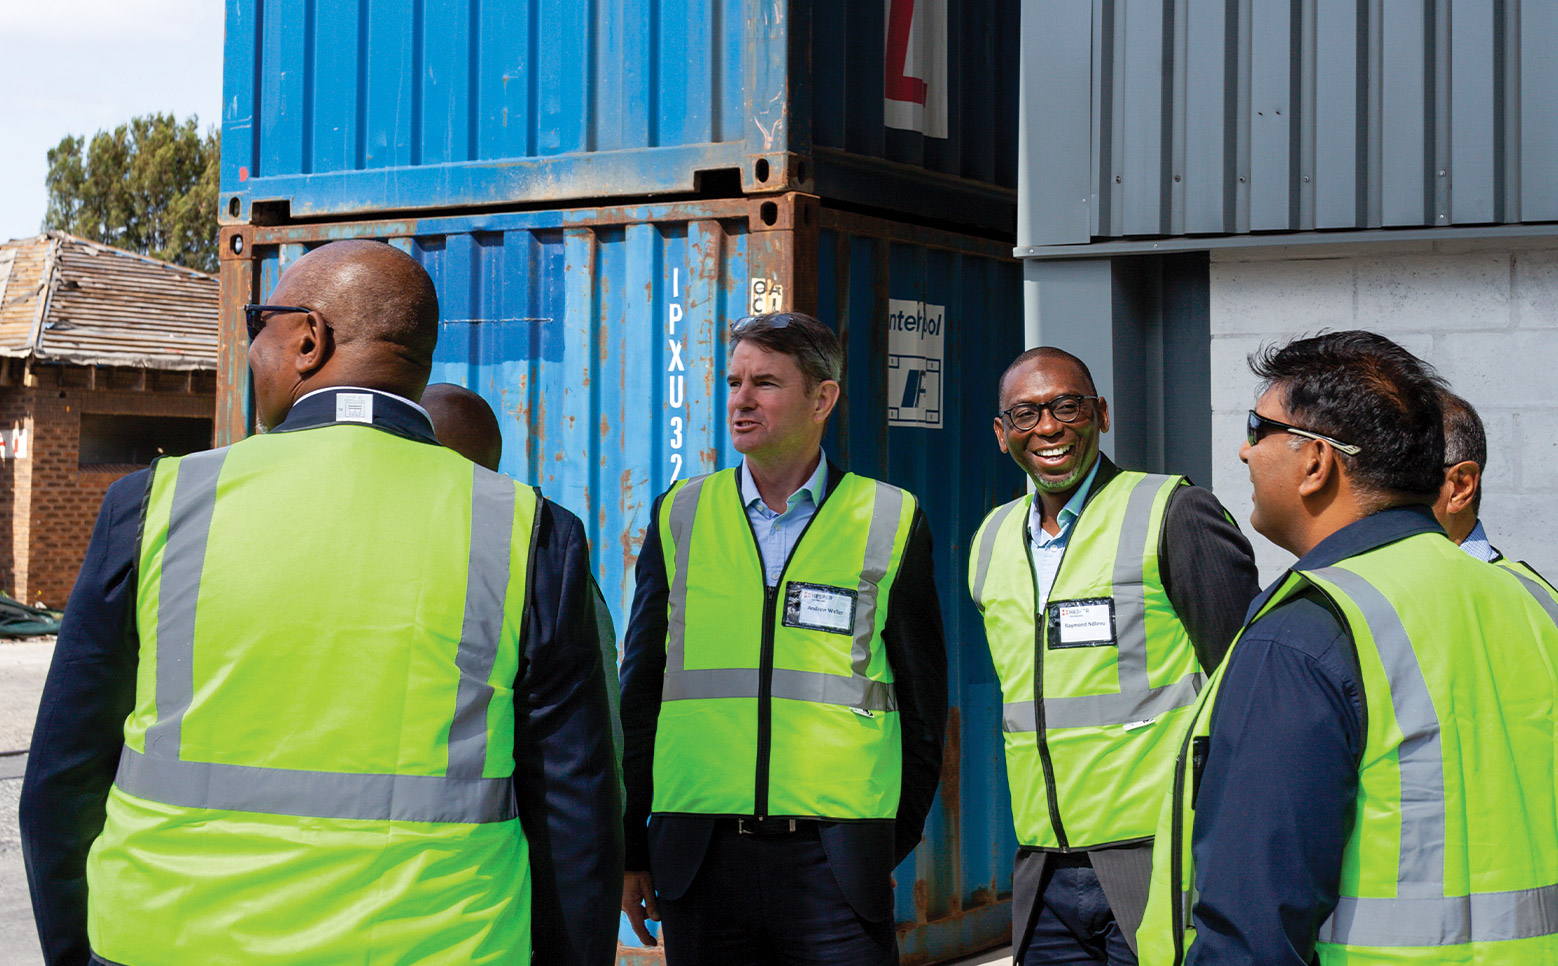 The Grindrod Limited Board visit various Grindrod operations in Cape Town